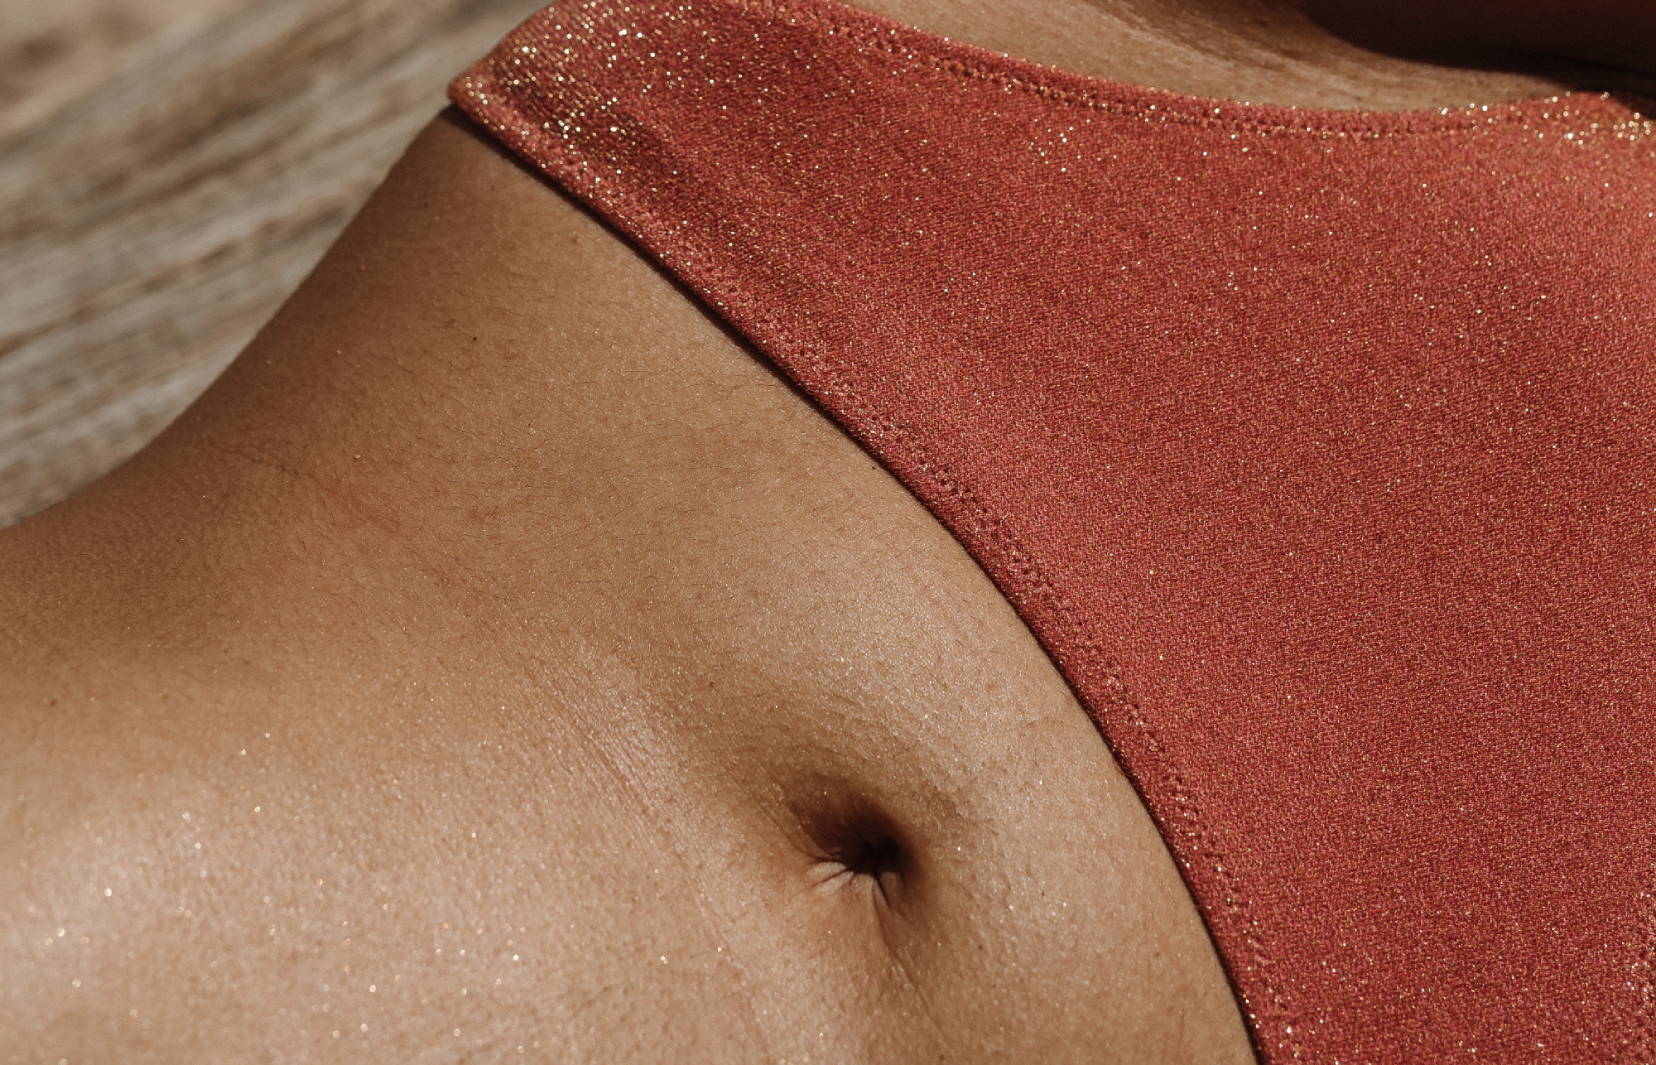 Close up of a woman’s belly button and pelvis dressed in shiny red underwear.